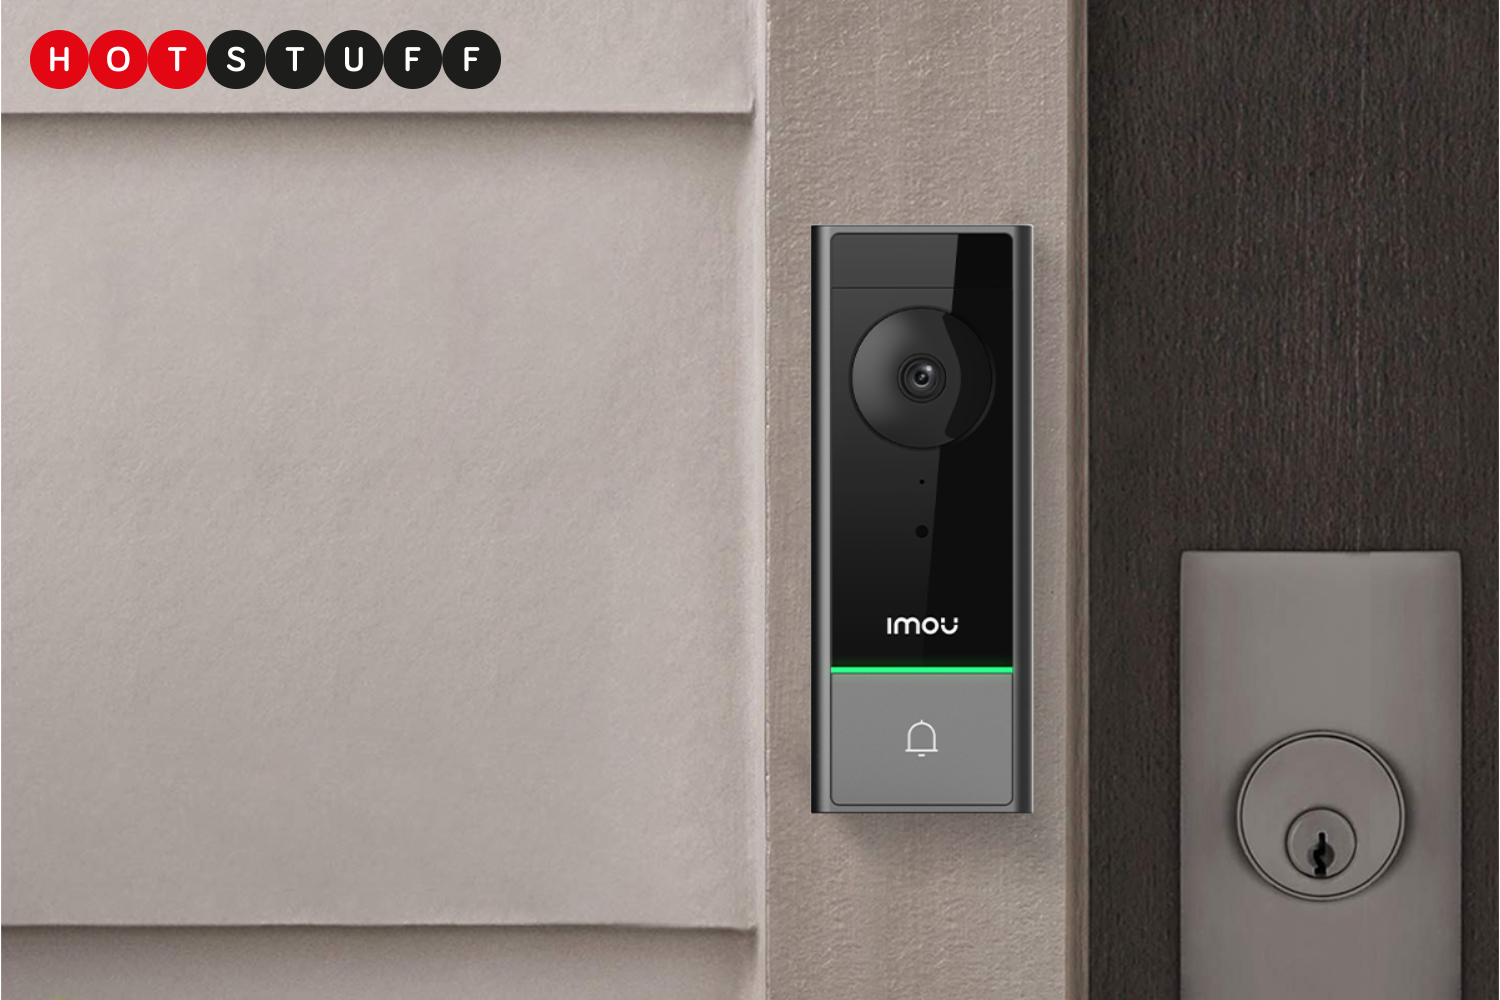 This Imou smart doorbell doesn’t require a monthly subscription